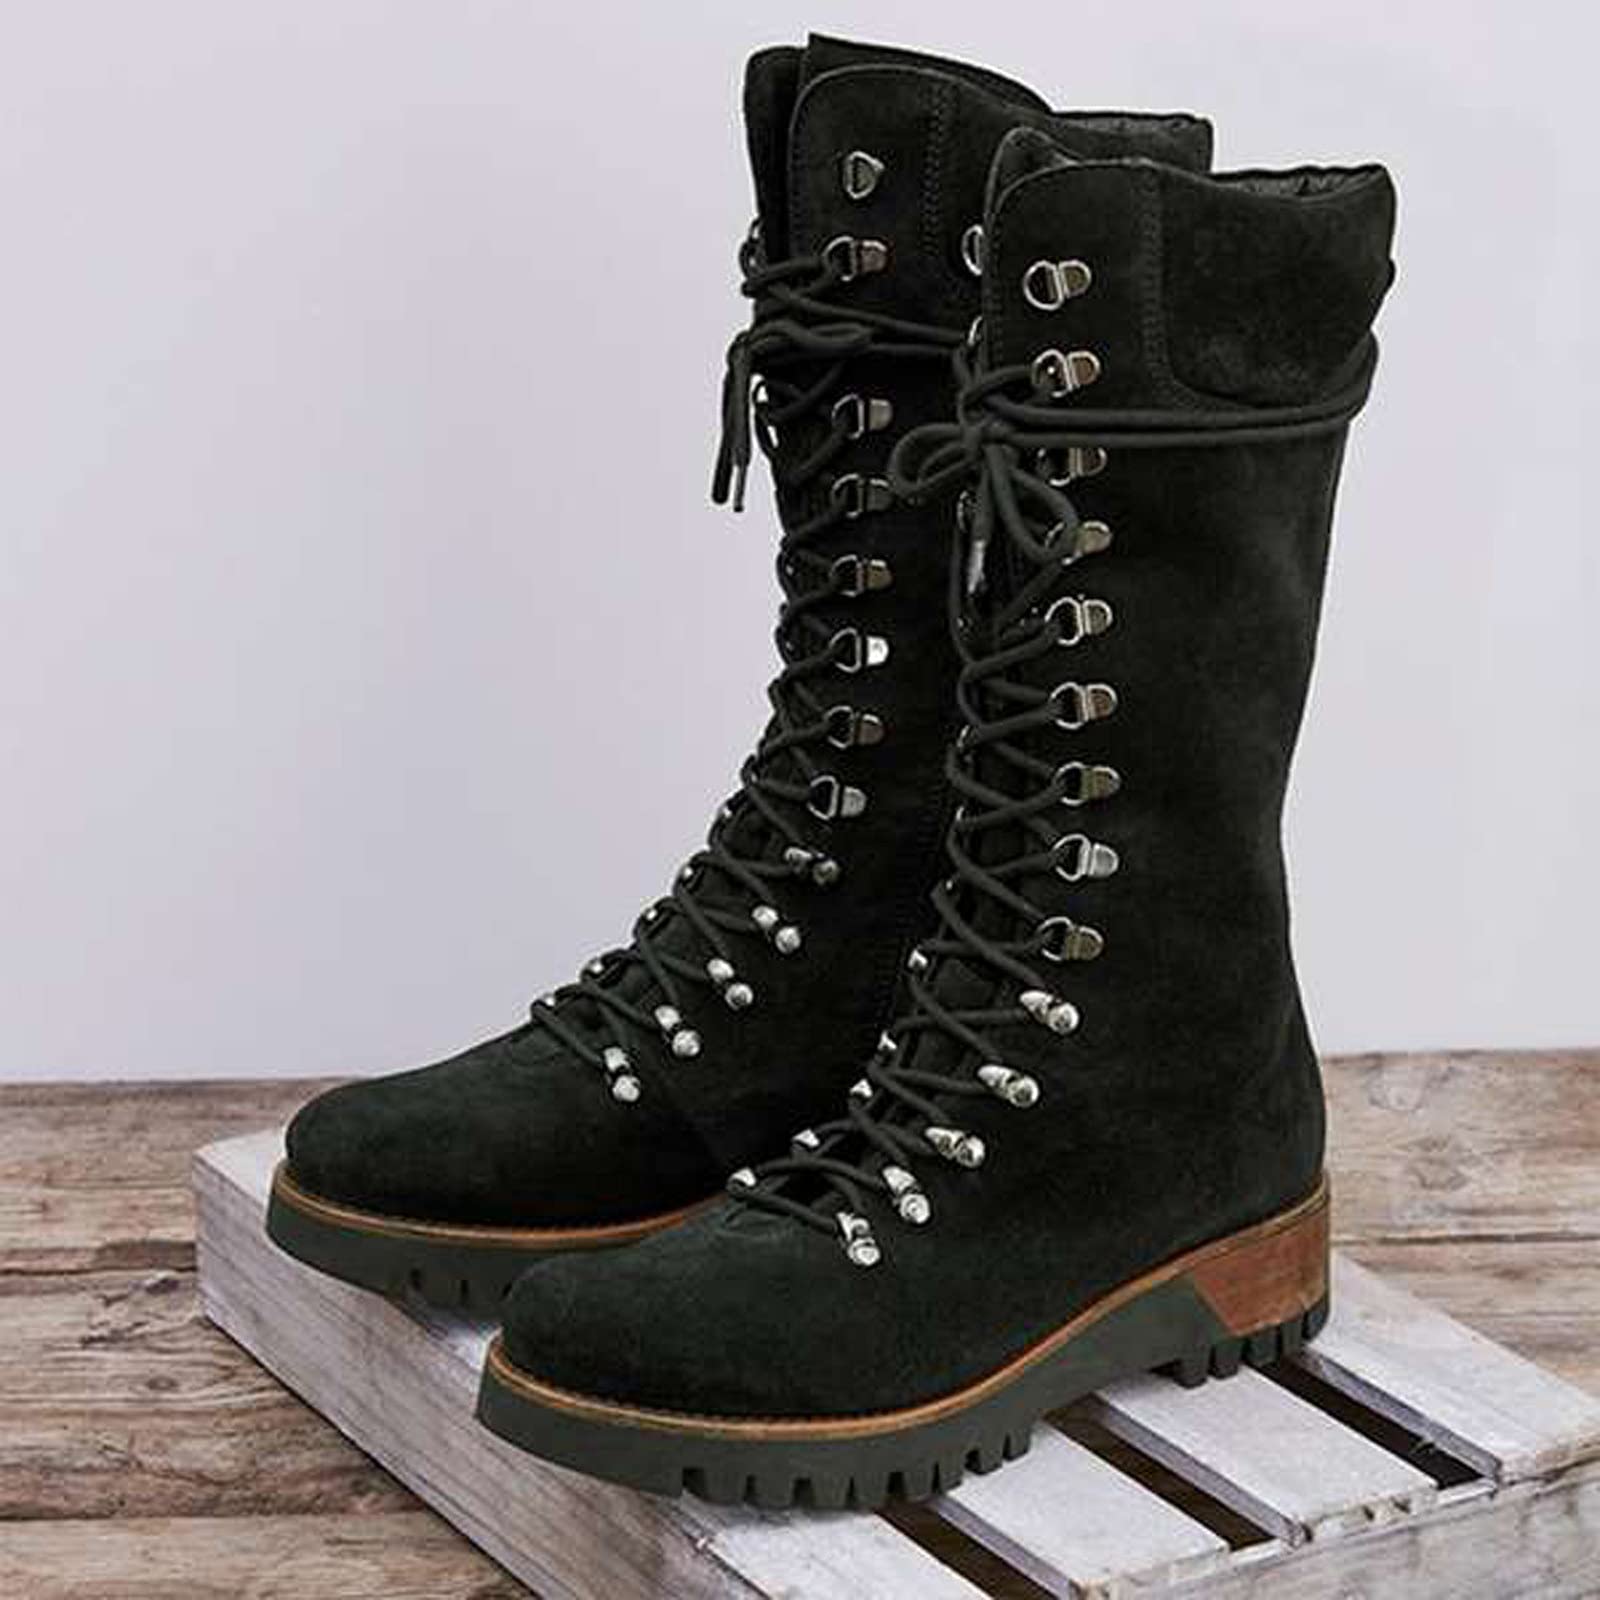 Women's Lace Up Suede Outdoor Warm Hiker Snow Boots